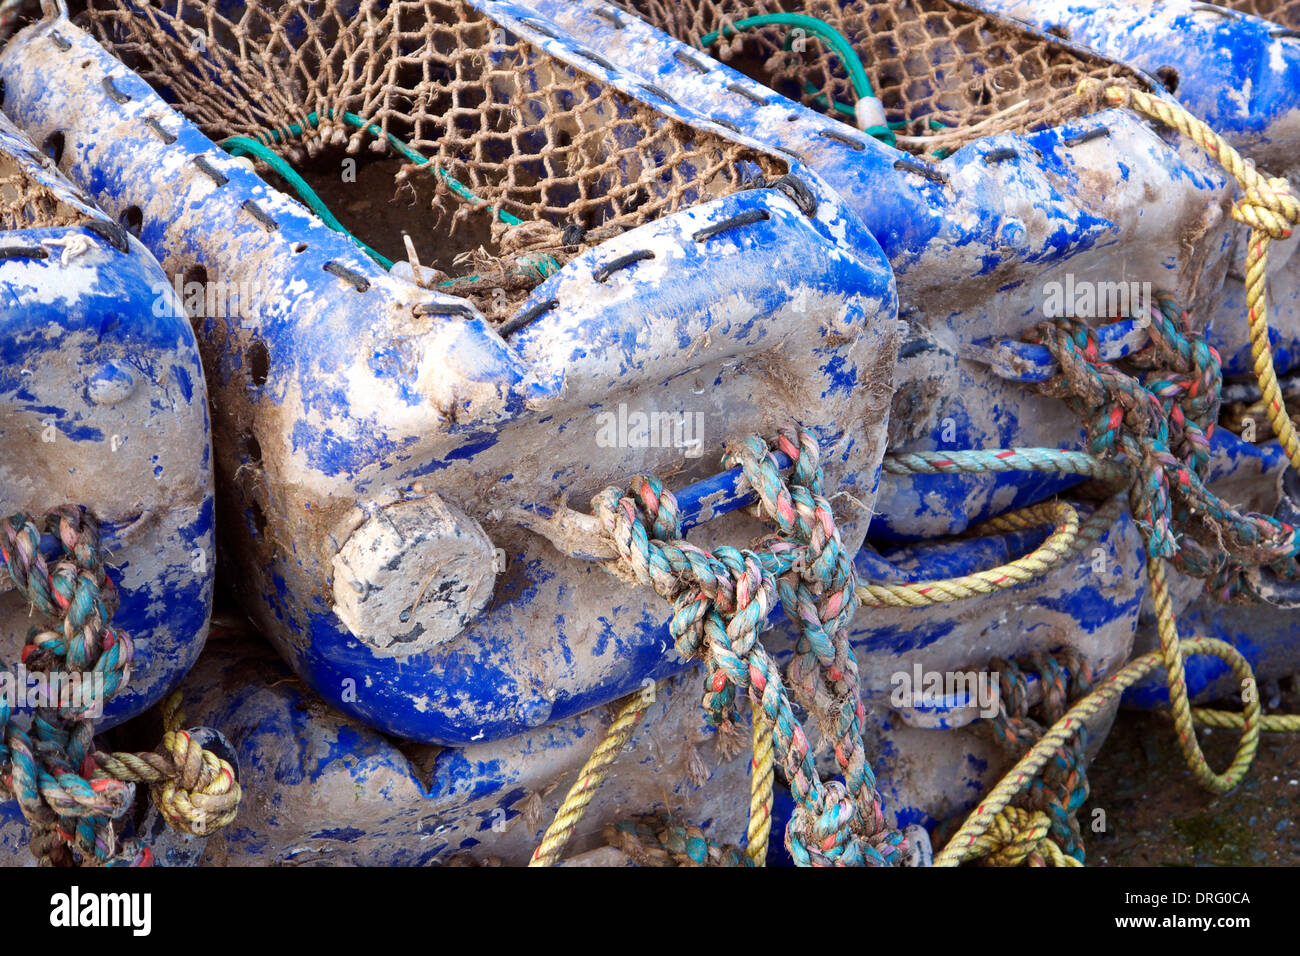 Home made lobster pots used for commercial crab and lobster fishing. Stock Photo